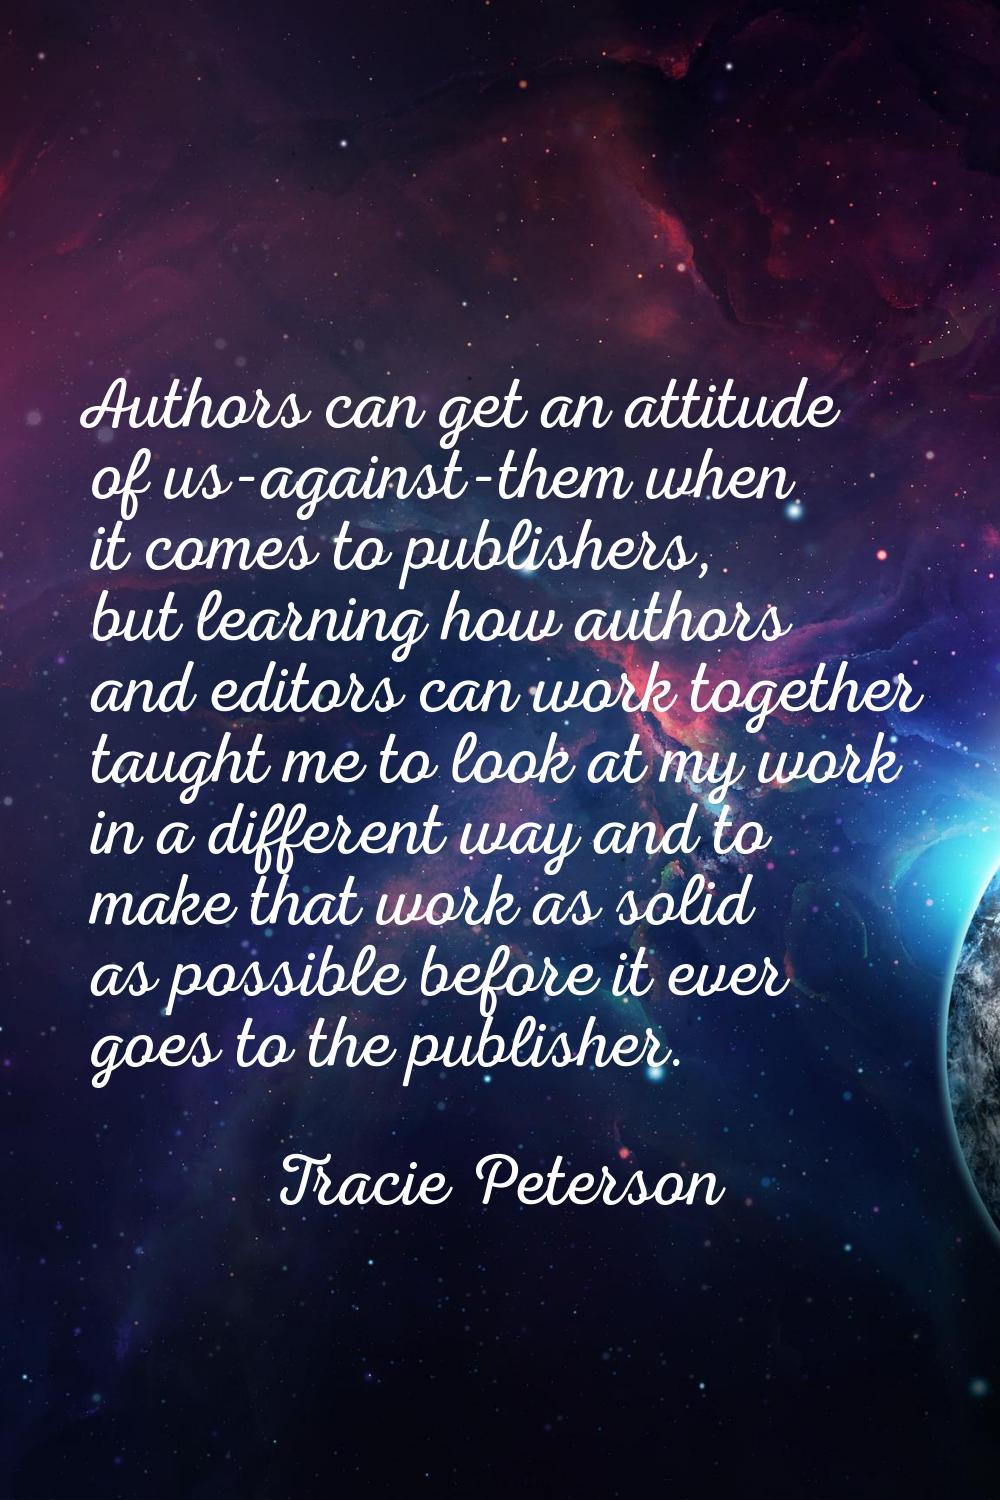 Authors can get an attitude of us-against-them when it comes to publishers, but learning how author